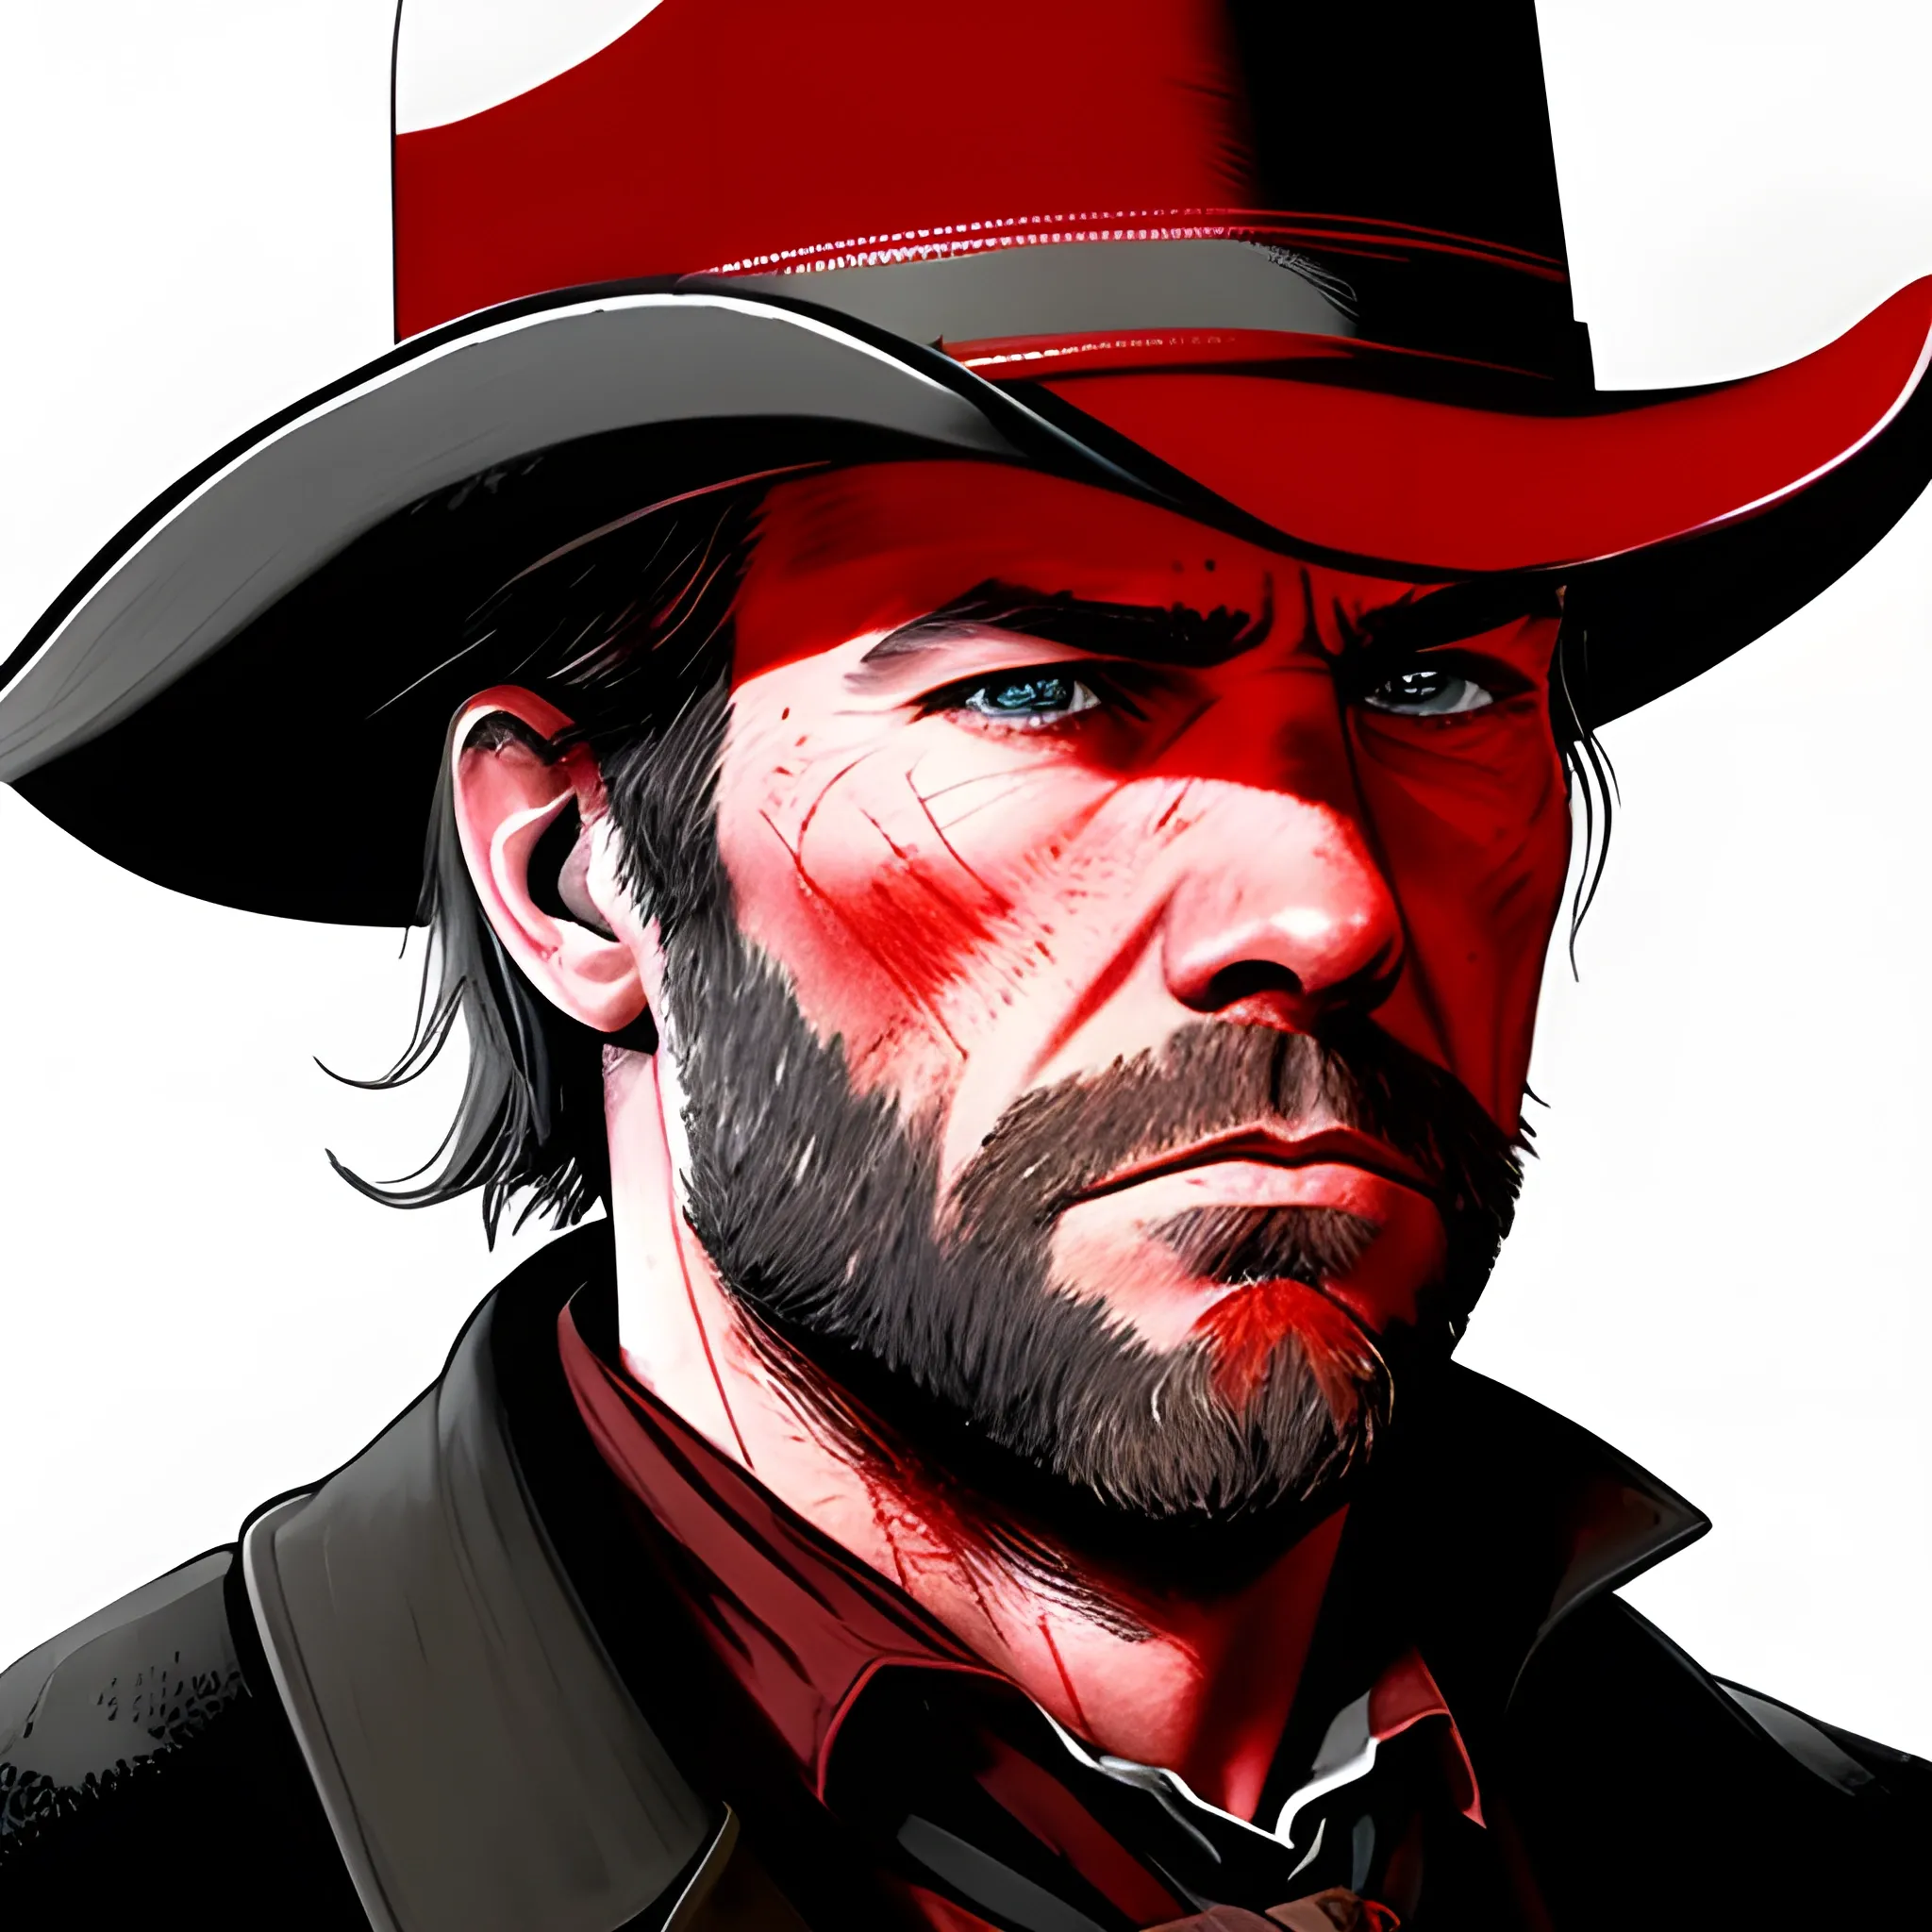 , Pencil Sketch, red, arthur morgan, rdr2, face only, intense, looking away, side angle, view of cheek, coloured in red and black
